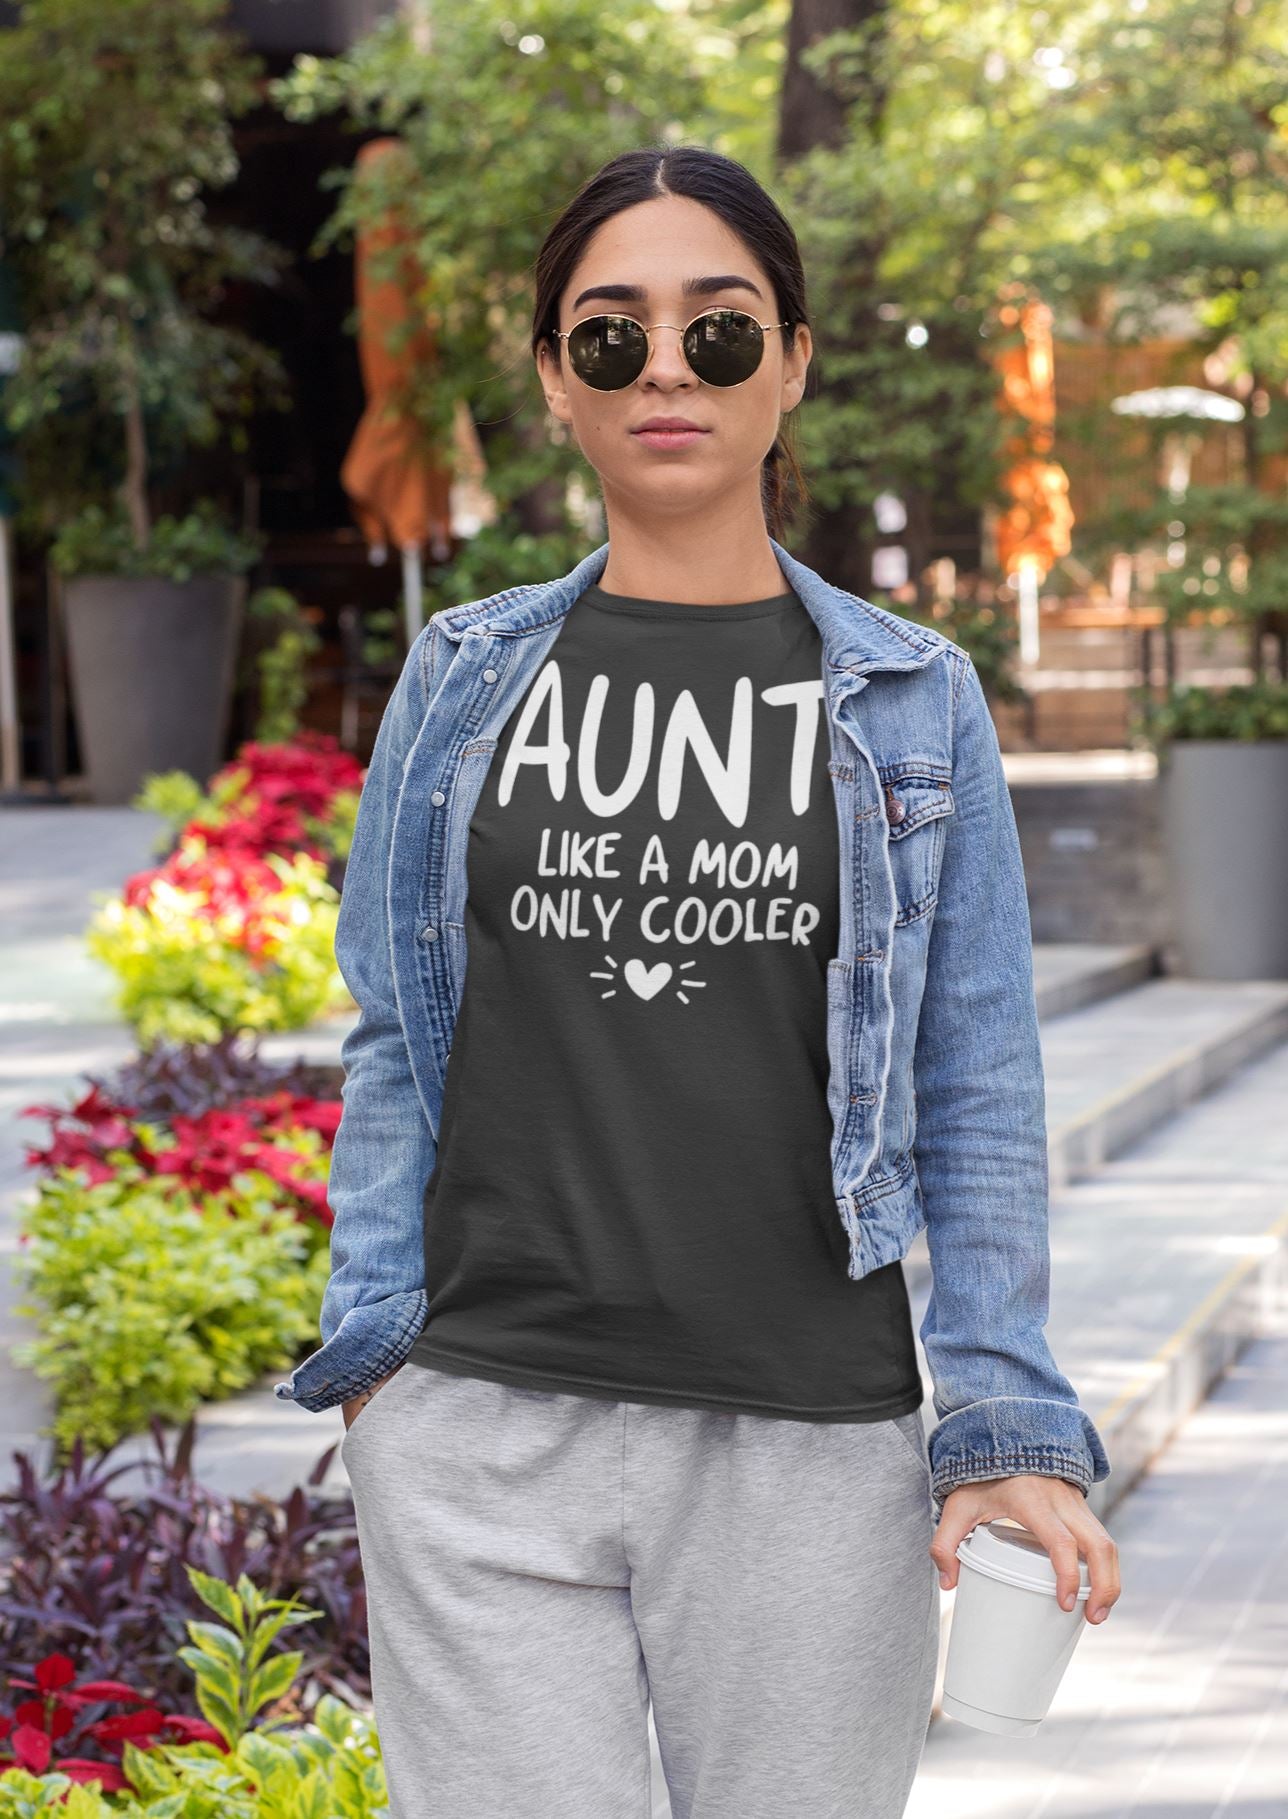 Aunt Like a Mom Only Cooler Special Black T Shirt for Women freeshipping - Catch My Drift India